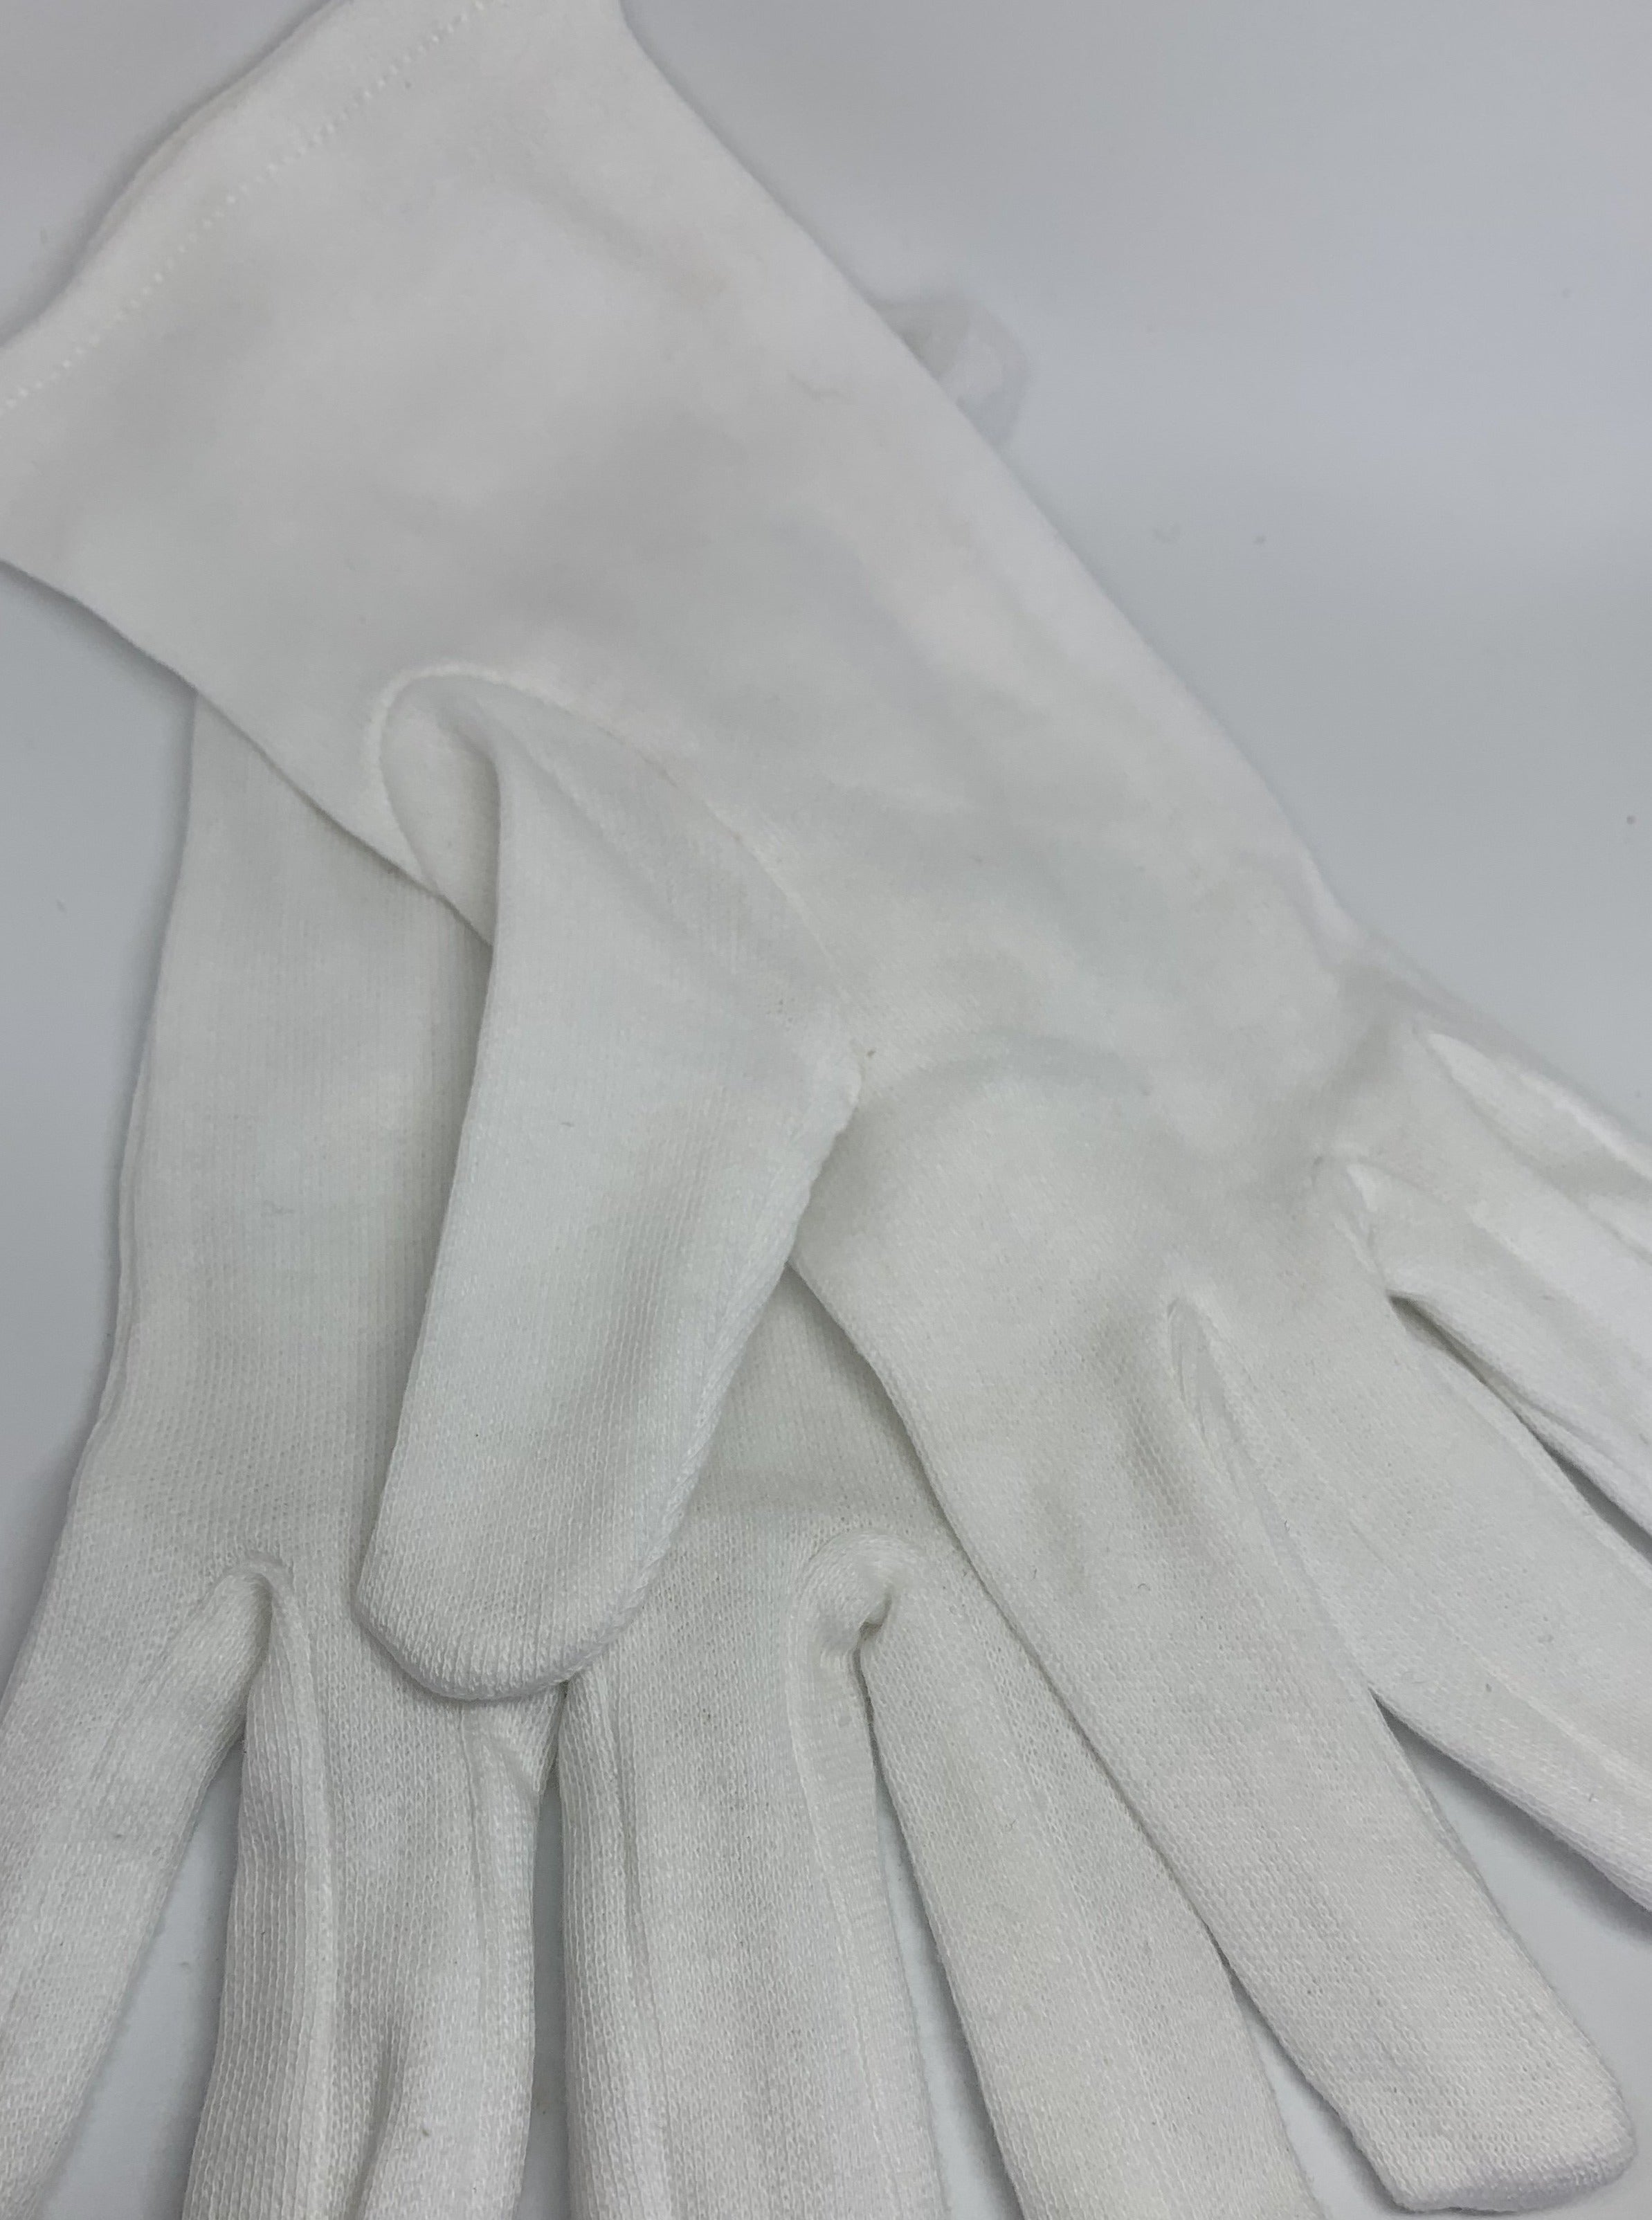 100% Organic Cotton Gloves for intensive skin treatment + protection